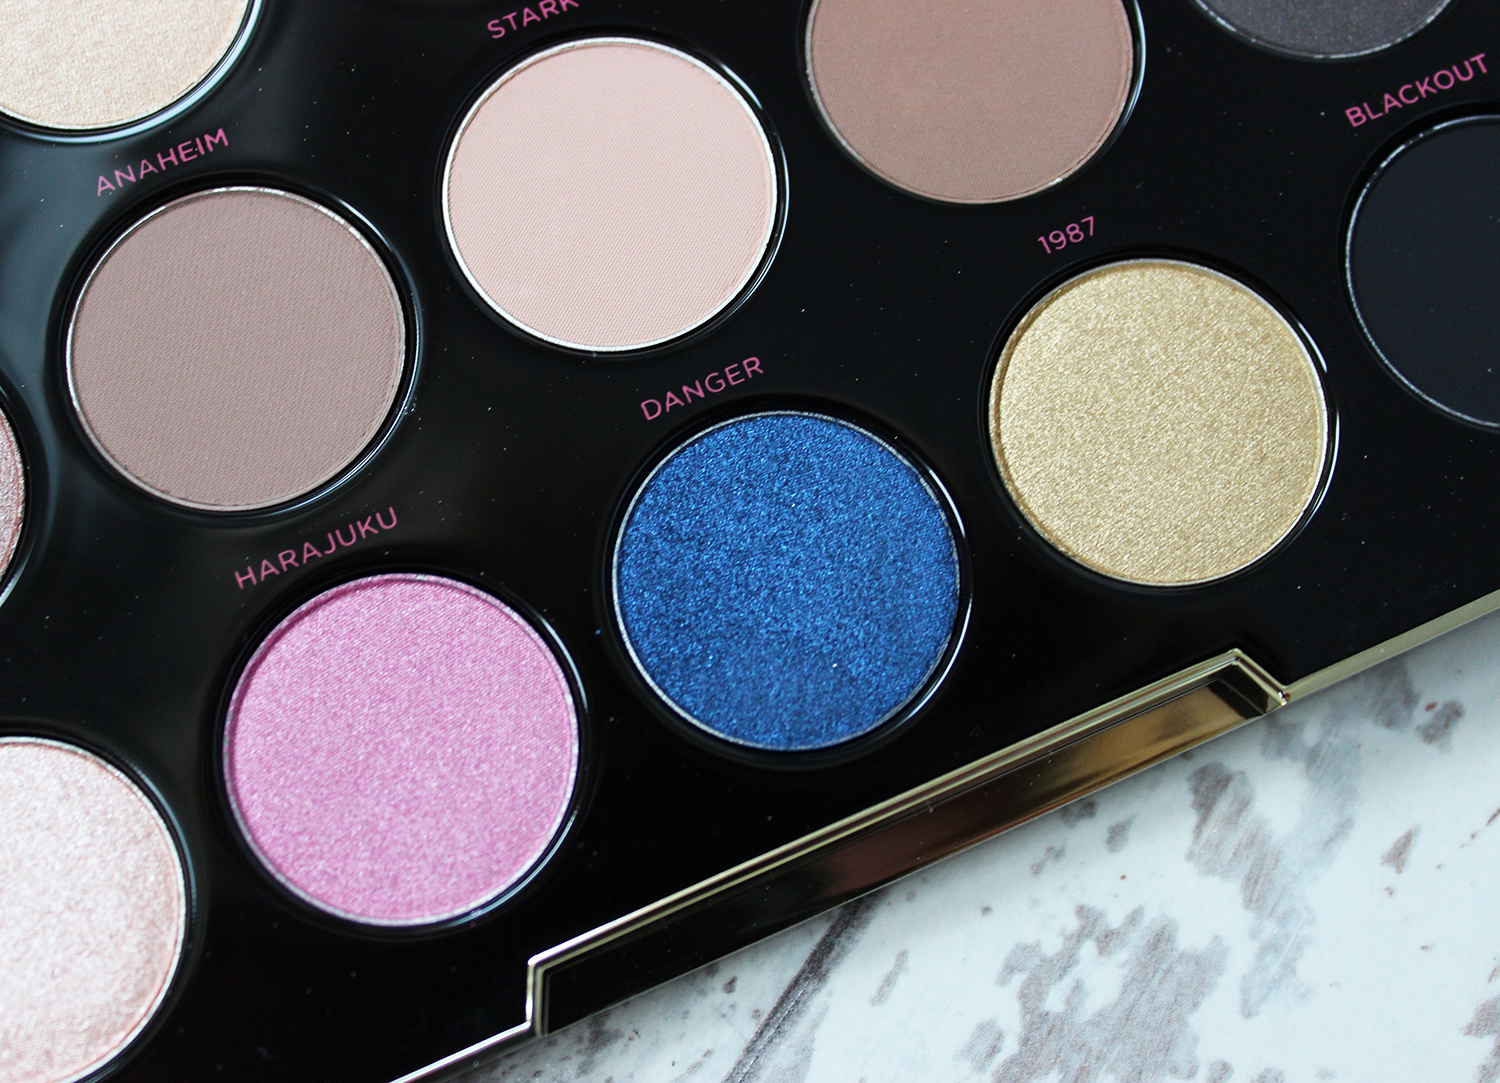 Urban Decay Gwen Stefani palette review and swatches